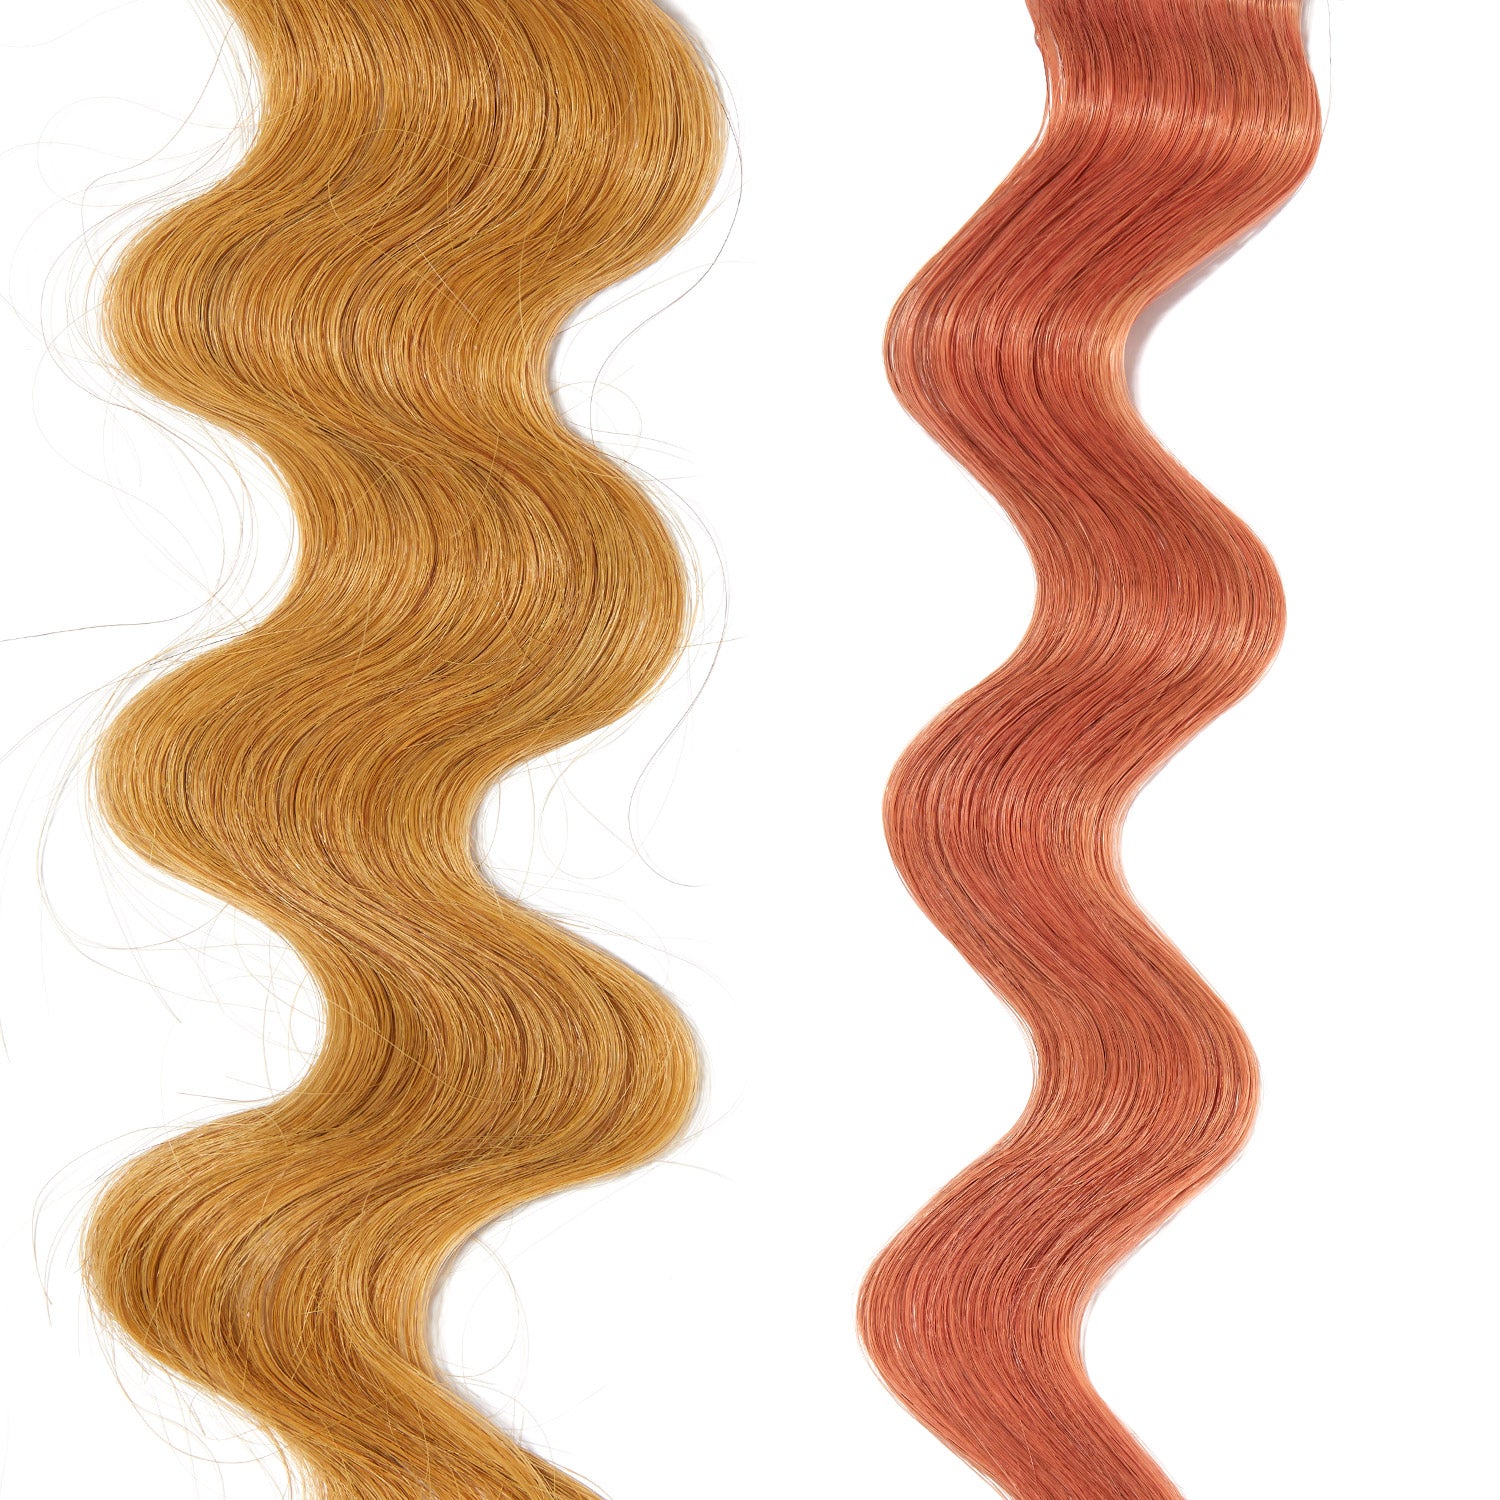 blonde and red hair colors